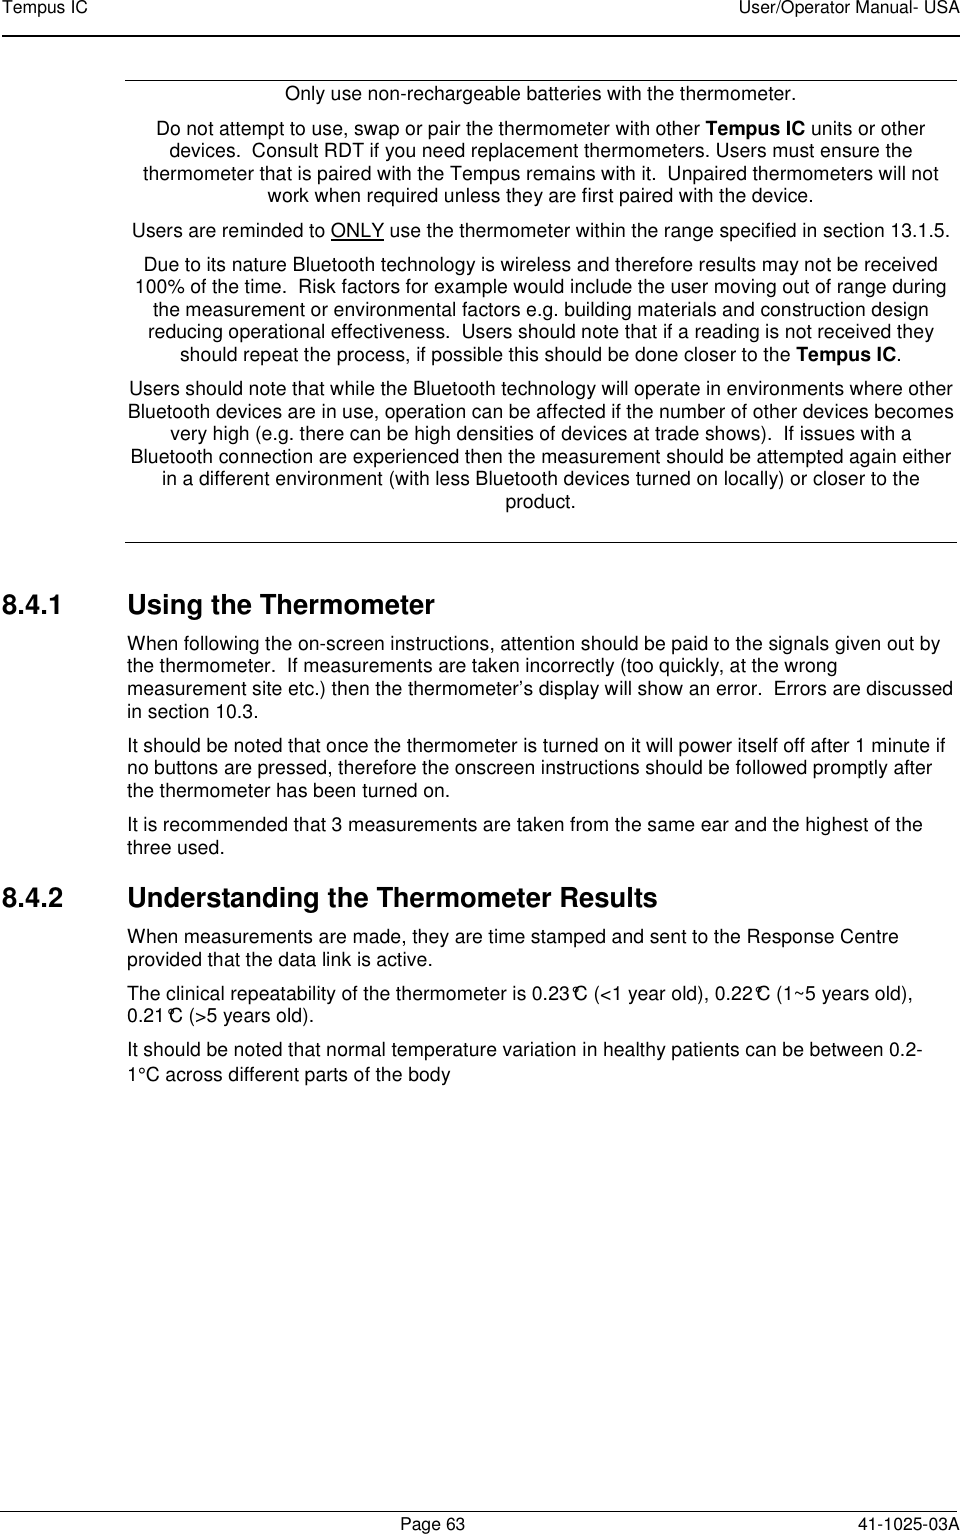 Tempus IC    User/Operator Manual- USA        Page 63  41-1025-03A Only use non-rechargeable batteries with the thermometer.  Do not attempt to use, swap or pair the thermometer with other Tempus IC units or other devices.  Consult RDT if you need replacement thermometers. Users must ensure the thermometer that is paired with the Tempus remains with it.  Unpaired thermometers will not work when required unless they are first paired with the device. Users are reminded to ONLY use the thermometer within the range specified in section 13.1.5.  Due to its nature Bluetooth technology is wireless and therefore results may not be received 100% of the time.  Risk factors for example would include the user moving out of range during the measurement or environmental factors e.g. building materials and construction design reducing operational effectiveness.  Users should note that if a reading is not received they should repeat the process, if possible this should be done closer to the Tempus IC.   Users should note that while the Bluetooth technology will operate in environments where other Bluetooth devices are in use, operation can be affected if the number of other devices becomes very high (e.g. there can be high densities of devices at trade shows).  If issues with a Bluetooth connection are experienced then the measurement should be attempted again either in a different environment (with less Bluetooth devices turned on locally) or closer to the product.  8.4.1  Using the Thermometer When following the on-screen instructions, attention should be paid to the signals given out by the thermometer.  If measurements are taken incorrectly (too quickly, at the wrong measurement site etc.) then the thermometer’s display will show an error.  Errors are discussed in section 10.3. It should be noted that once the thermometer is turned on it will power itself off after 1 minute if no buttons are pressed, therefore the onscreen instructions should be followed promptly after the thermometer has been turned on. It is recommended that 3 measurements are taken from the same ear and the highest of the three used. 8.4.2  Understanding the Thermometer Results When measurements are made, they are time stamped and sent to the Response Centre provided that the data link is active. The clinical repeatability of the thermometer is 0.23°C (&lt;1 year old), 0.22°C (1~5 years old), 0.21°C (&gt;5 years old).   It should be noted that normal temperature variation in healthy patients can be between 0.2-1°C across different parts of the body